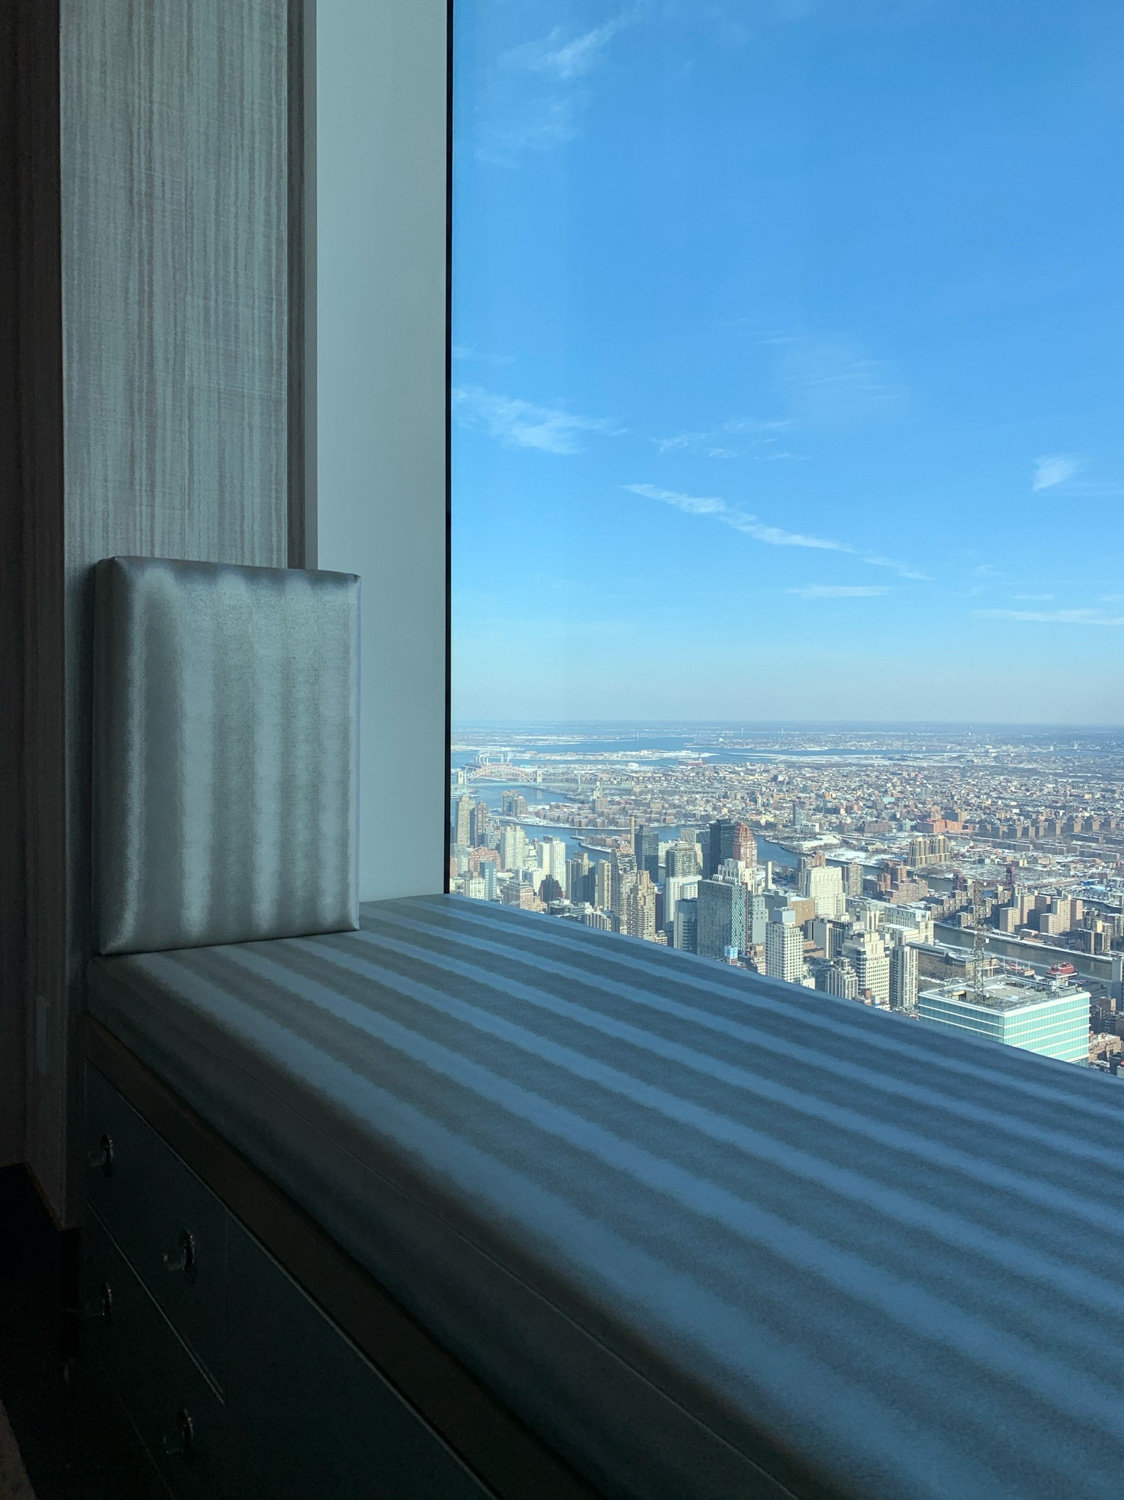 A custom upholstered bench cushion on a window seat overlooking a city skyline.